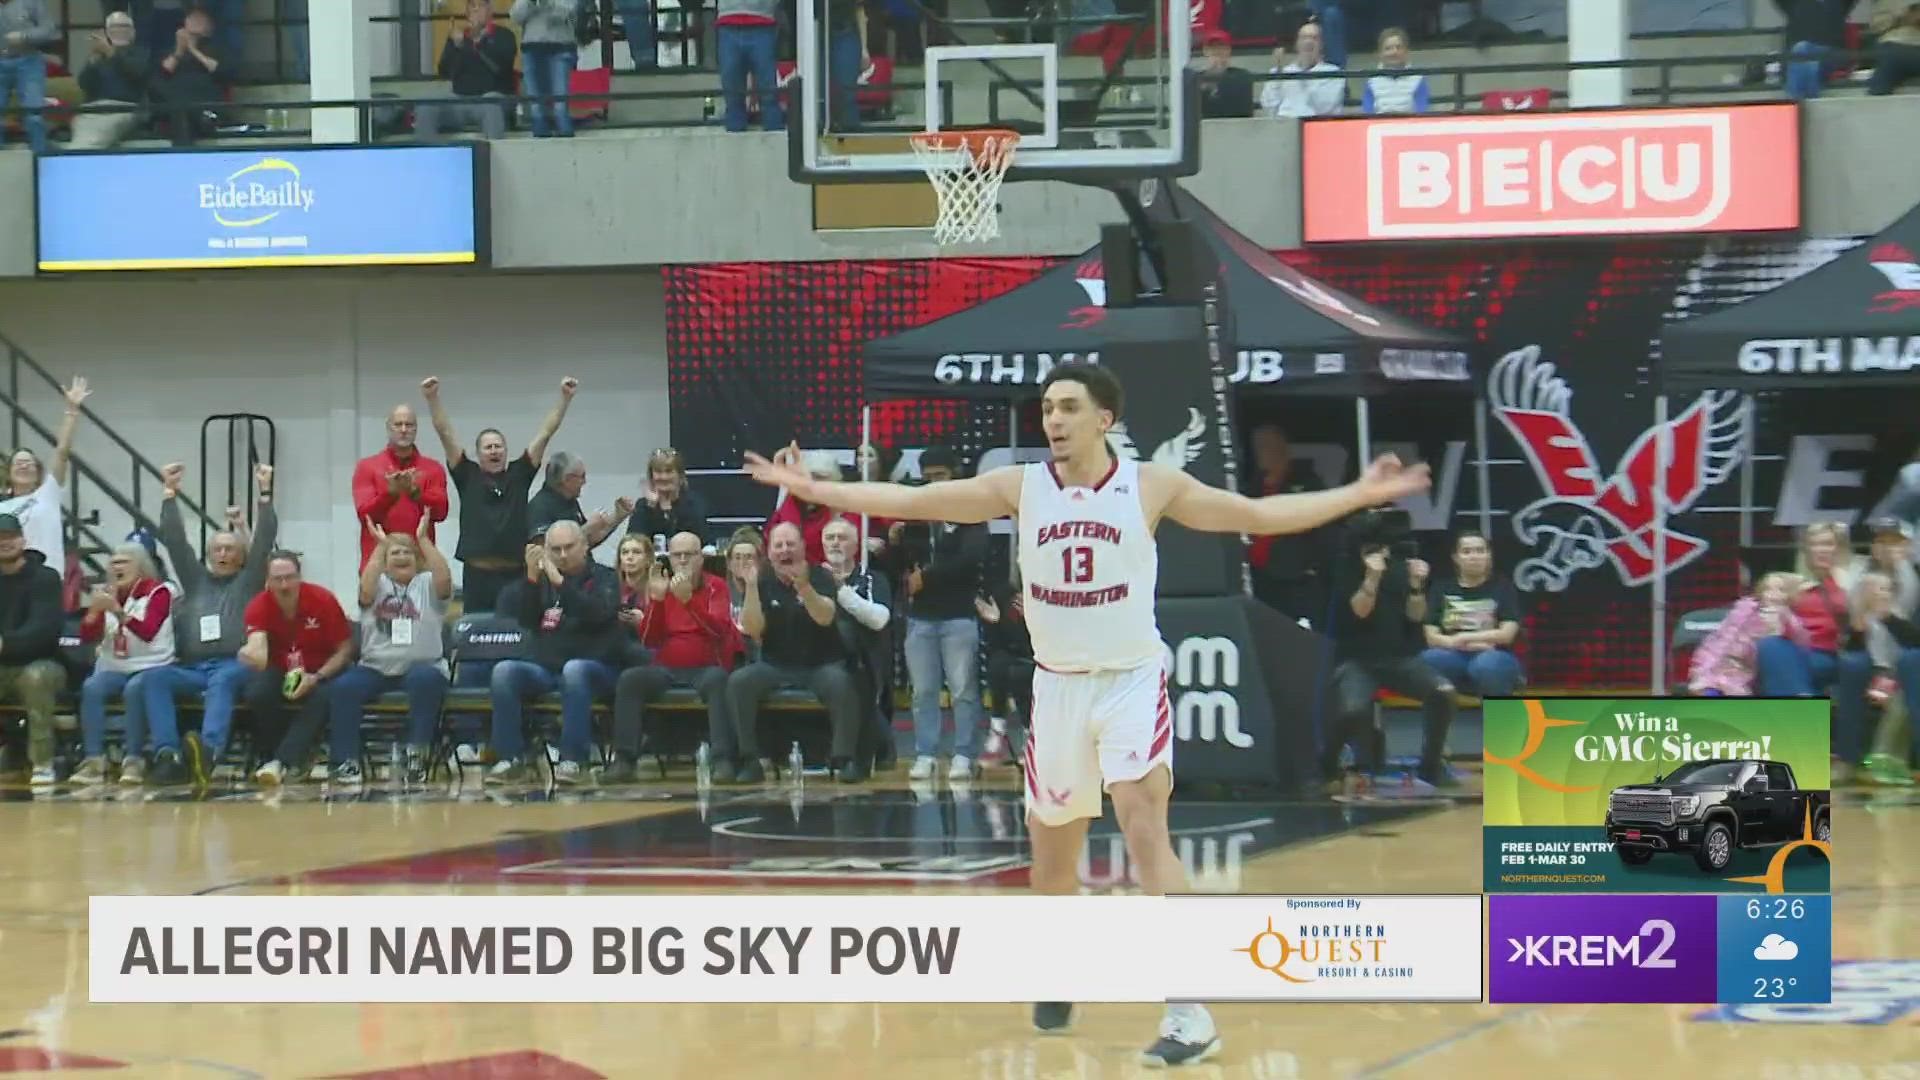 Eastern Washington guard Angelo Allegri named the Big Sky Player of the Week after averaging 22.5 points per game.